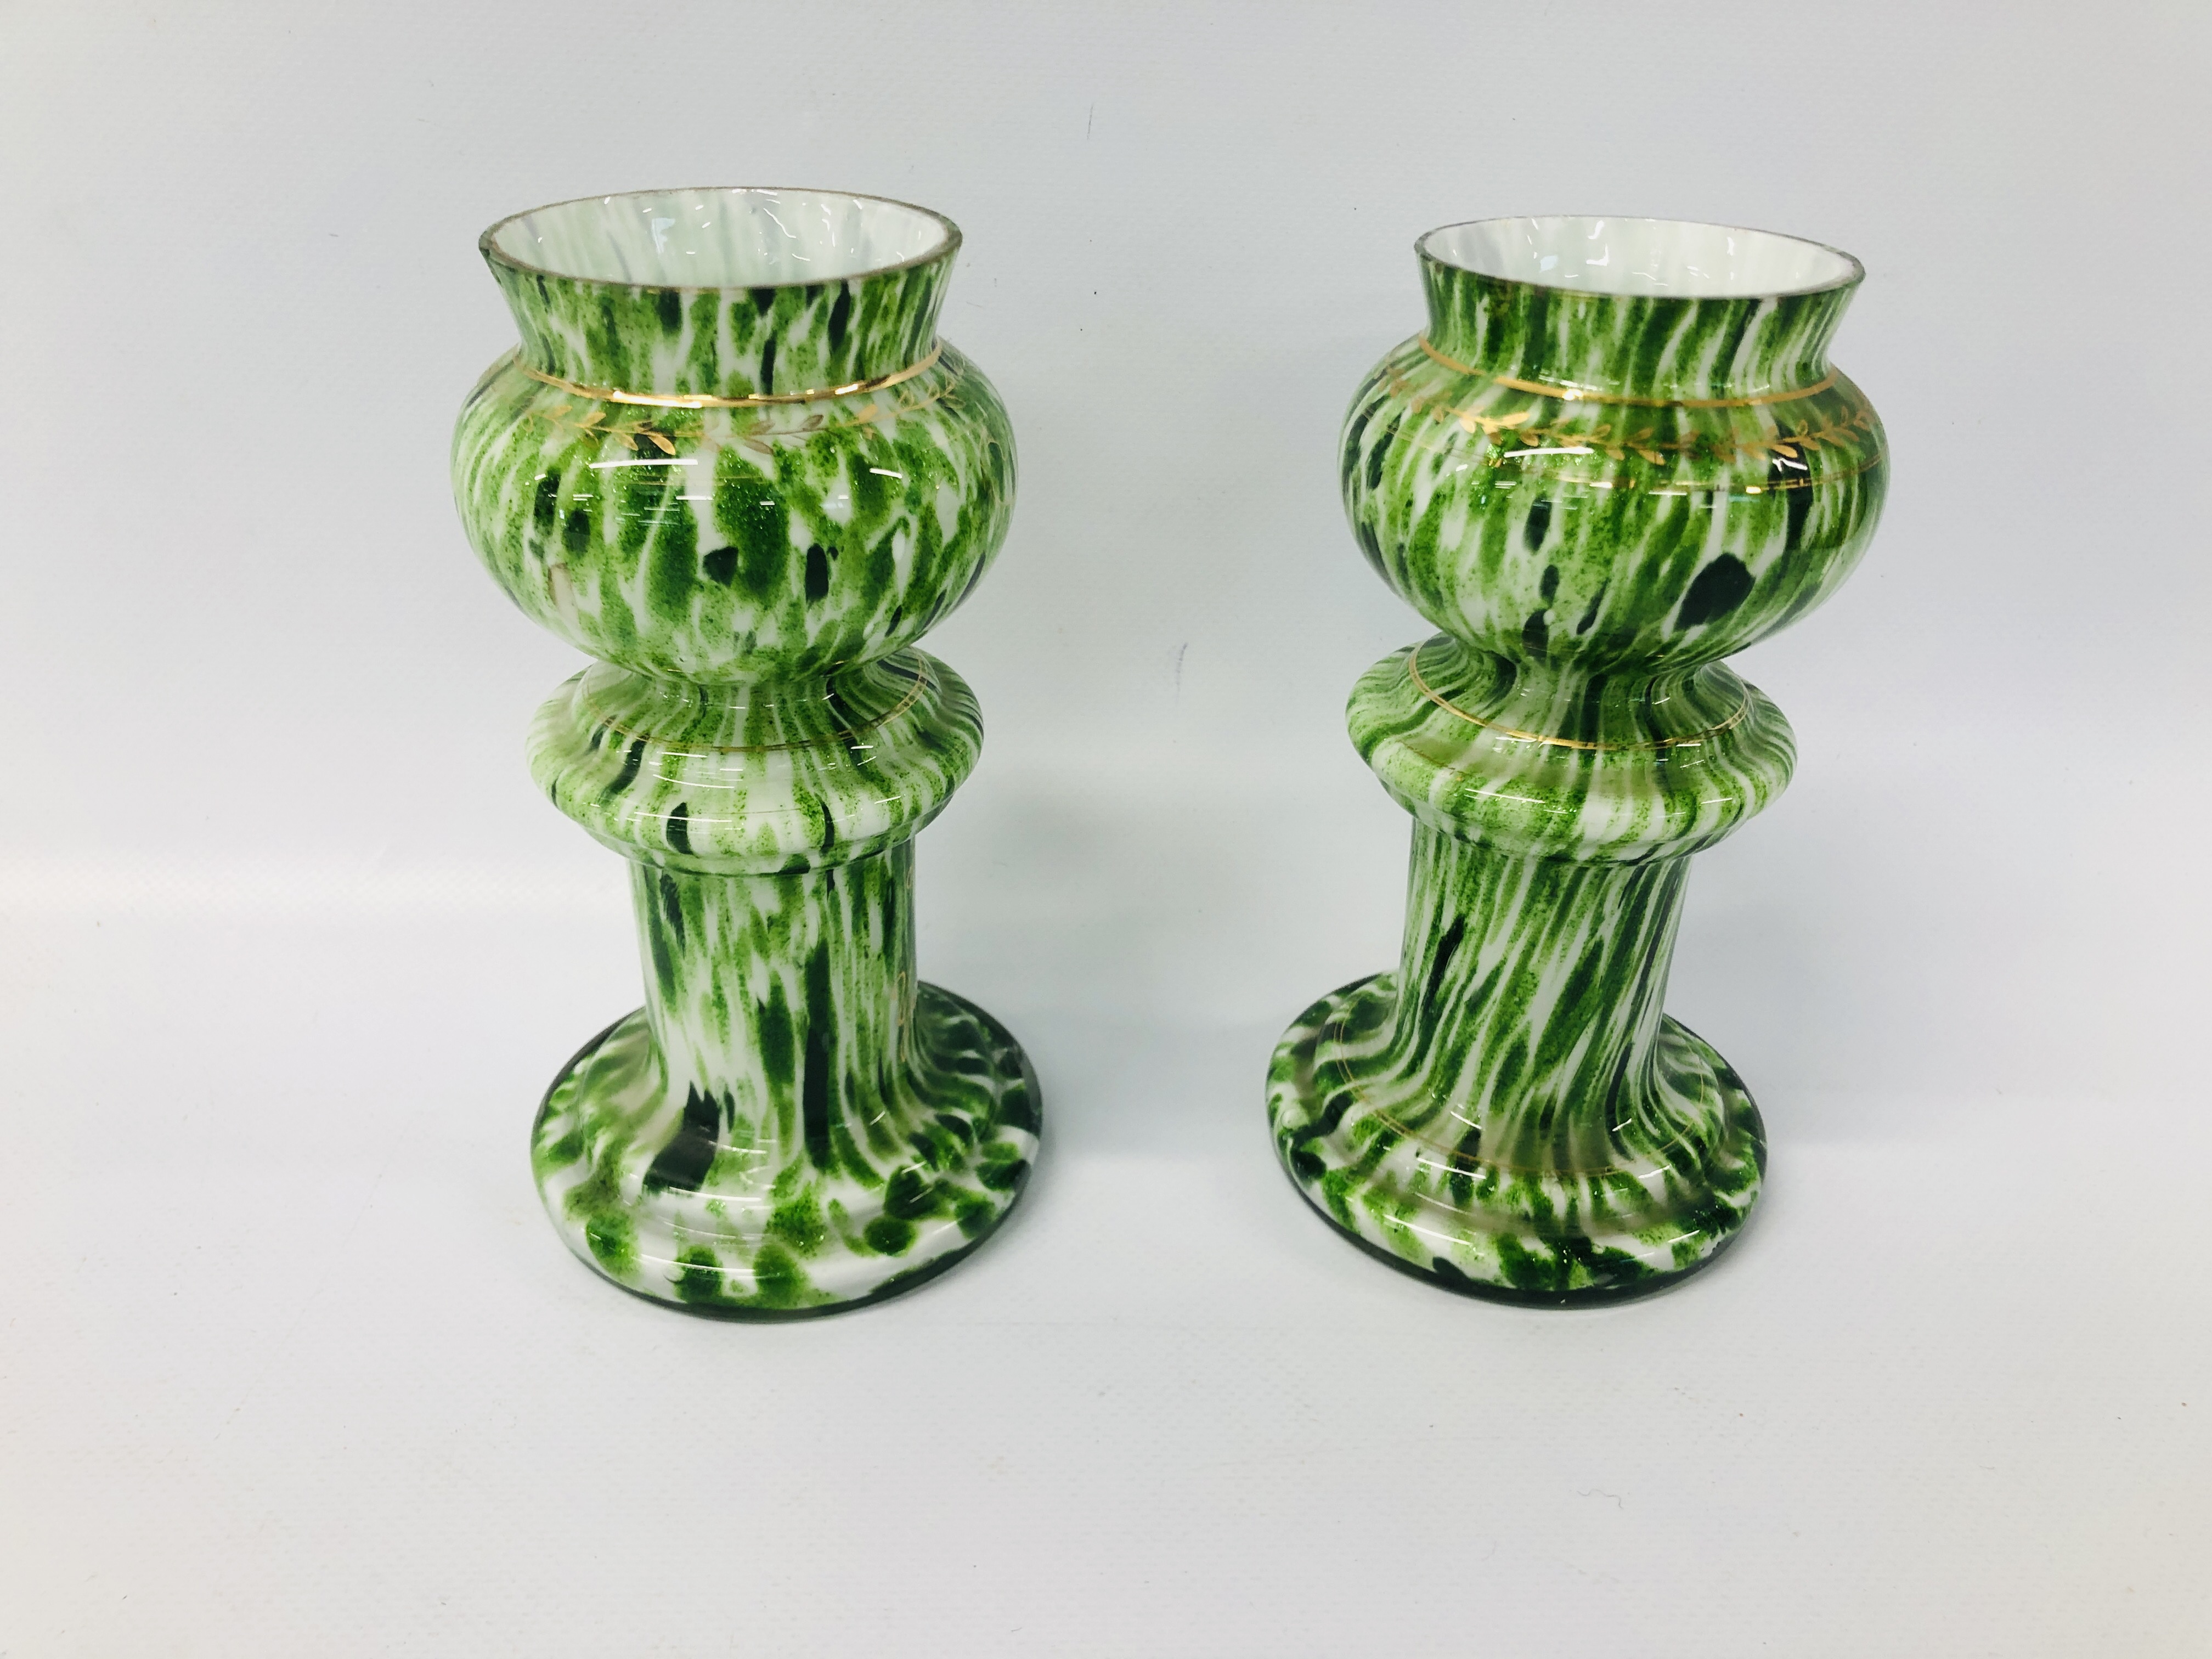 PAIR OF VINTAGE GREEN GLASS VASES, PINK & WHITE VASE ALONG WITH A CRYSTAL DISH MARKED MVSL, - Image 6 of 7